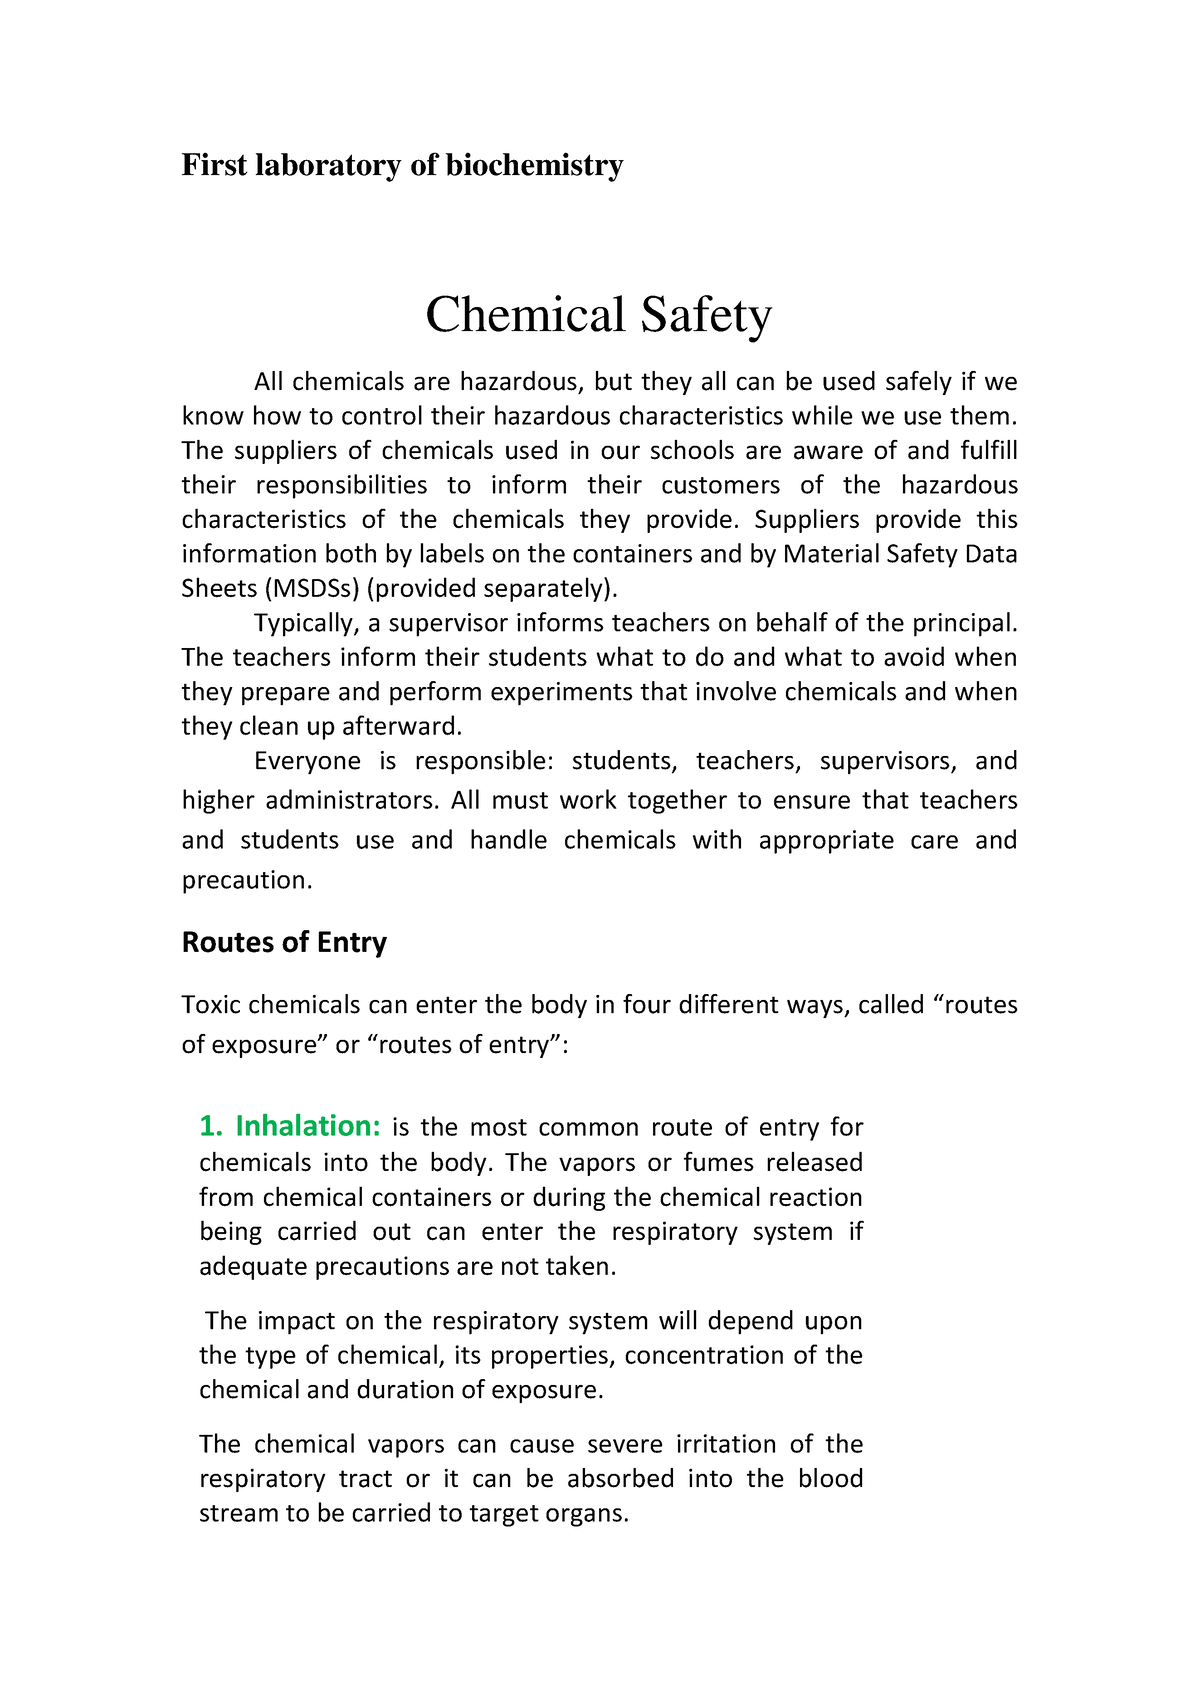 essay on safety in chemical industry